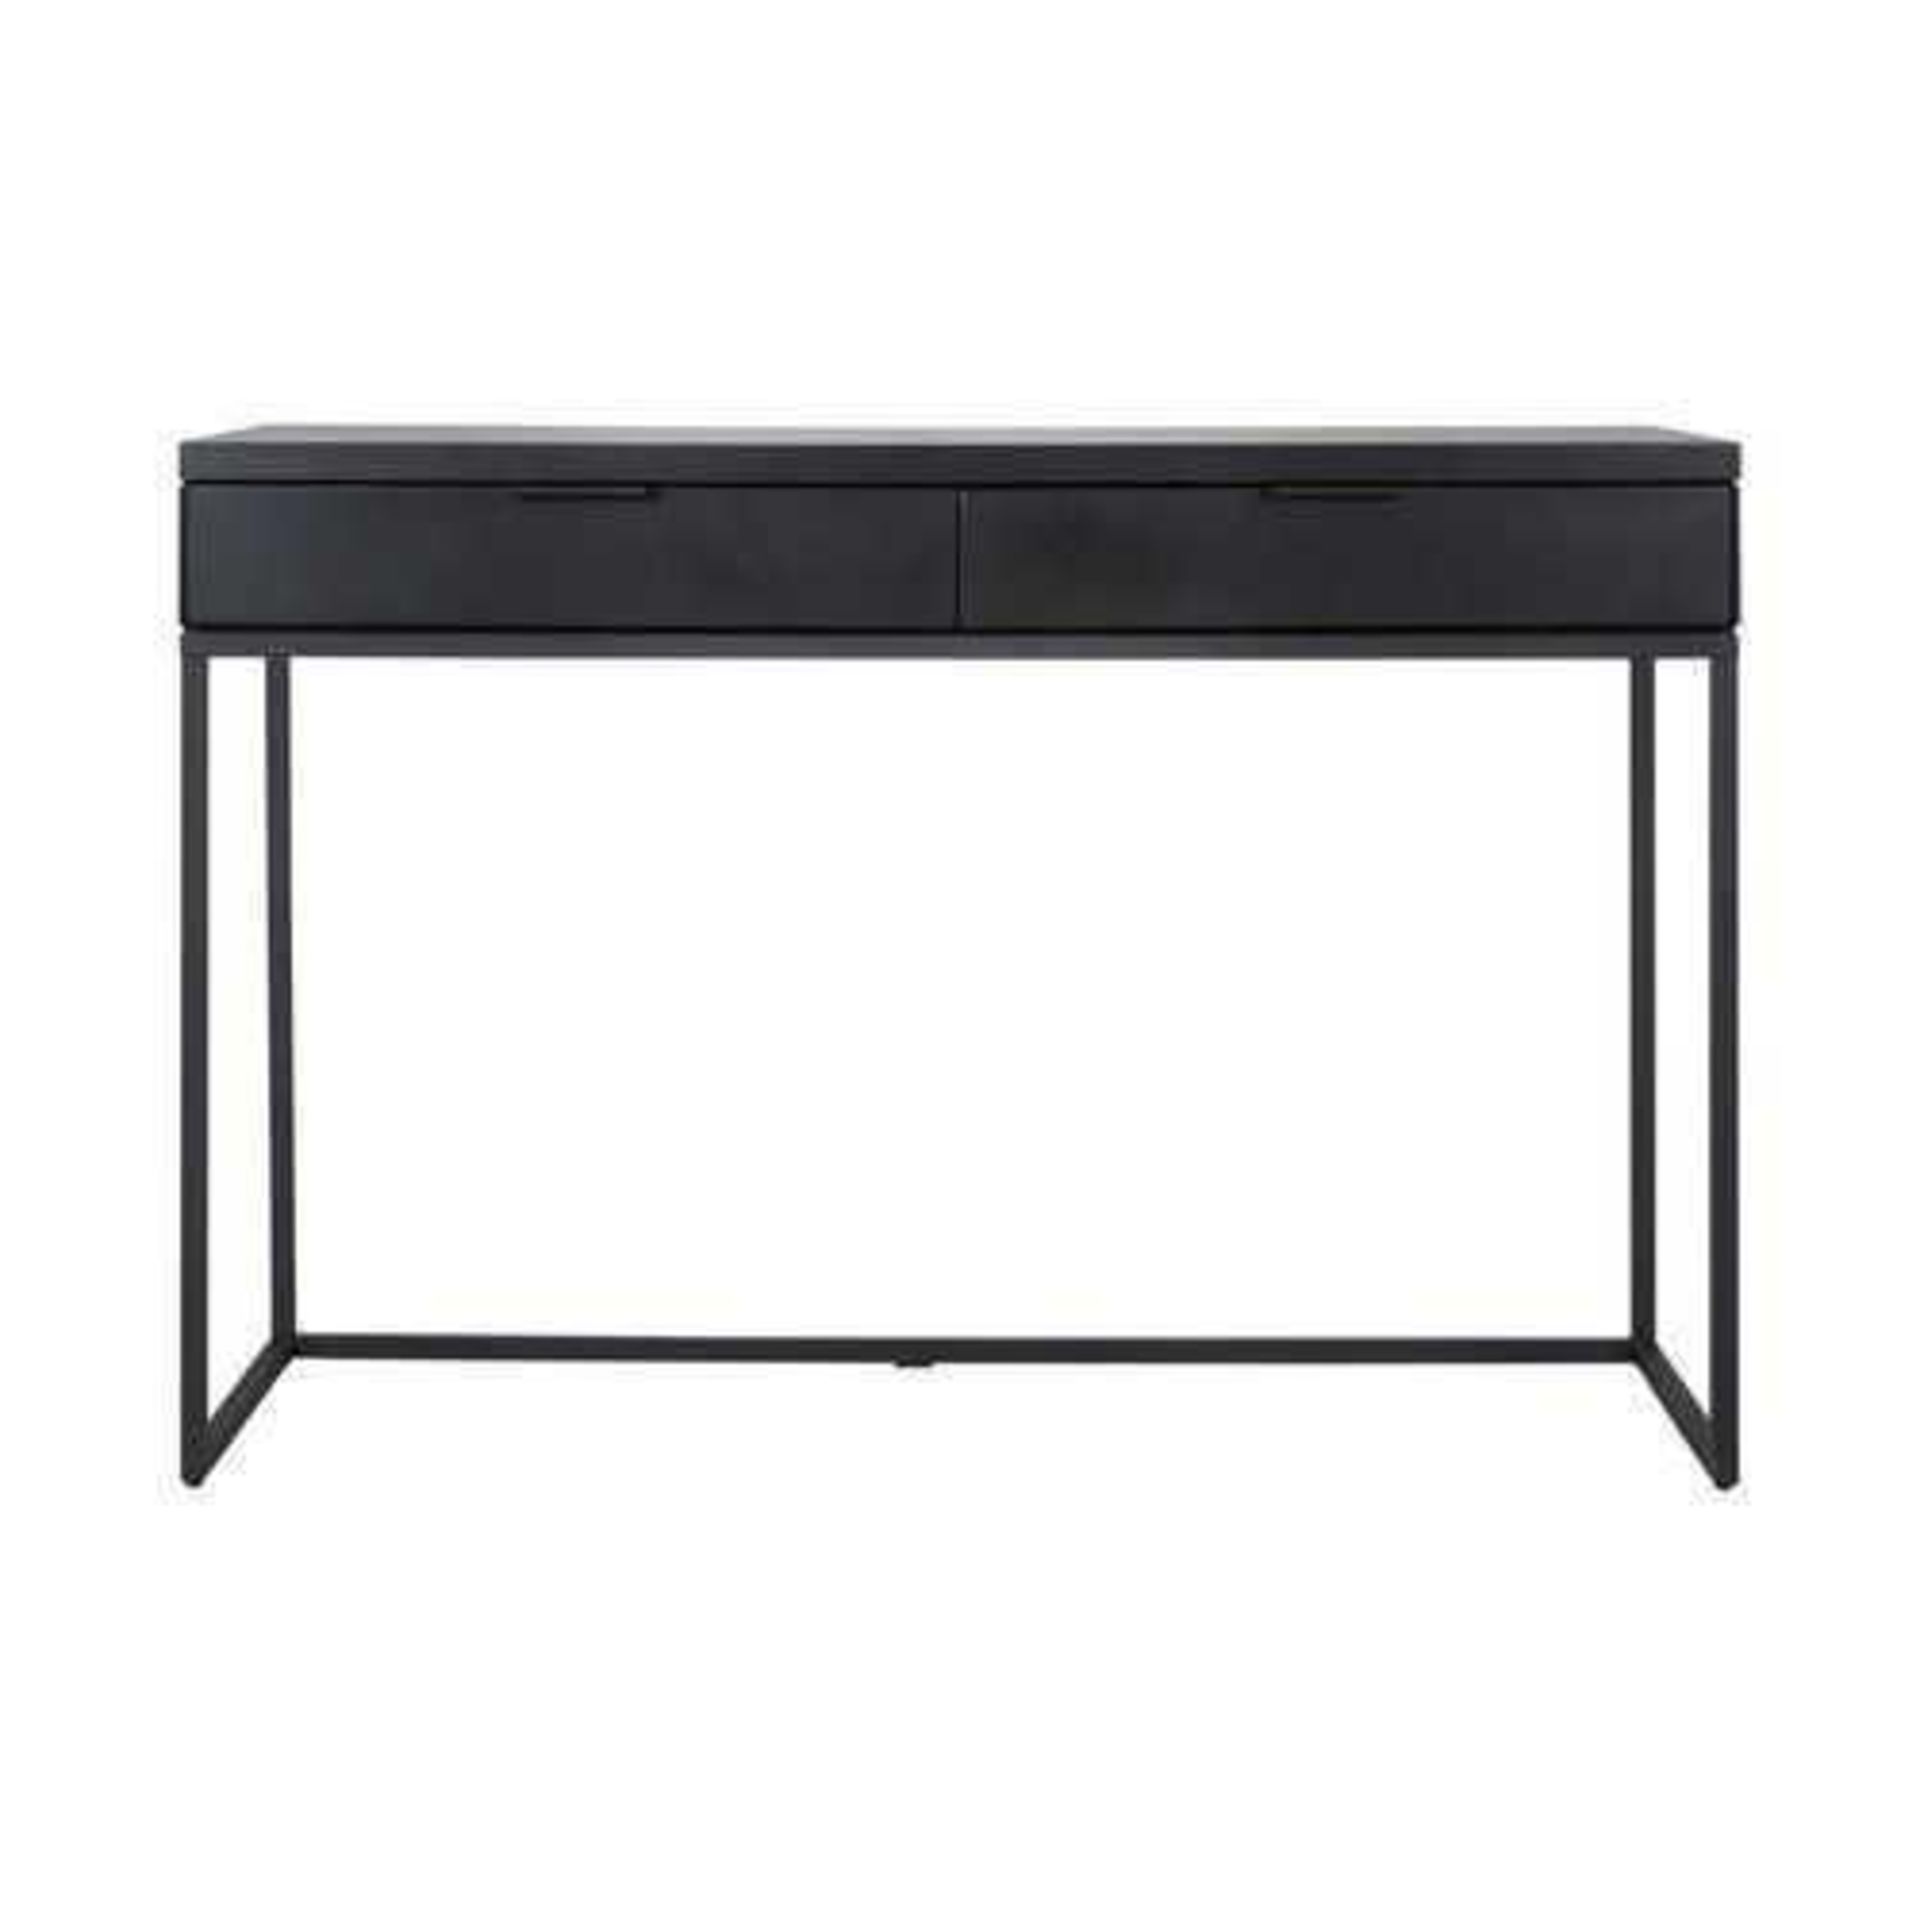 Boxed Ebern Designs Cara Console Table RRP £380 (19079)(Appraisals Available On Request) (Pictures